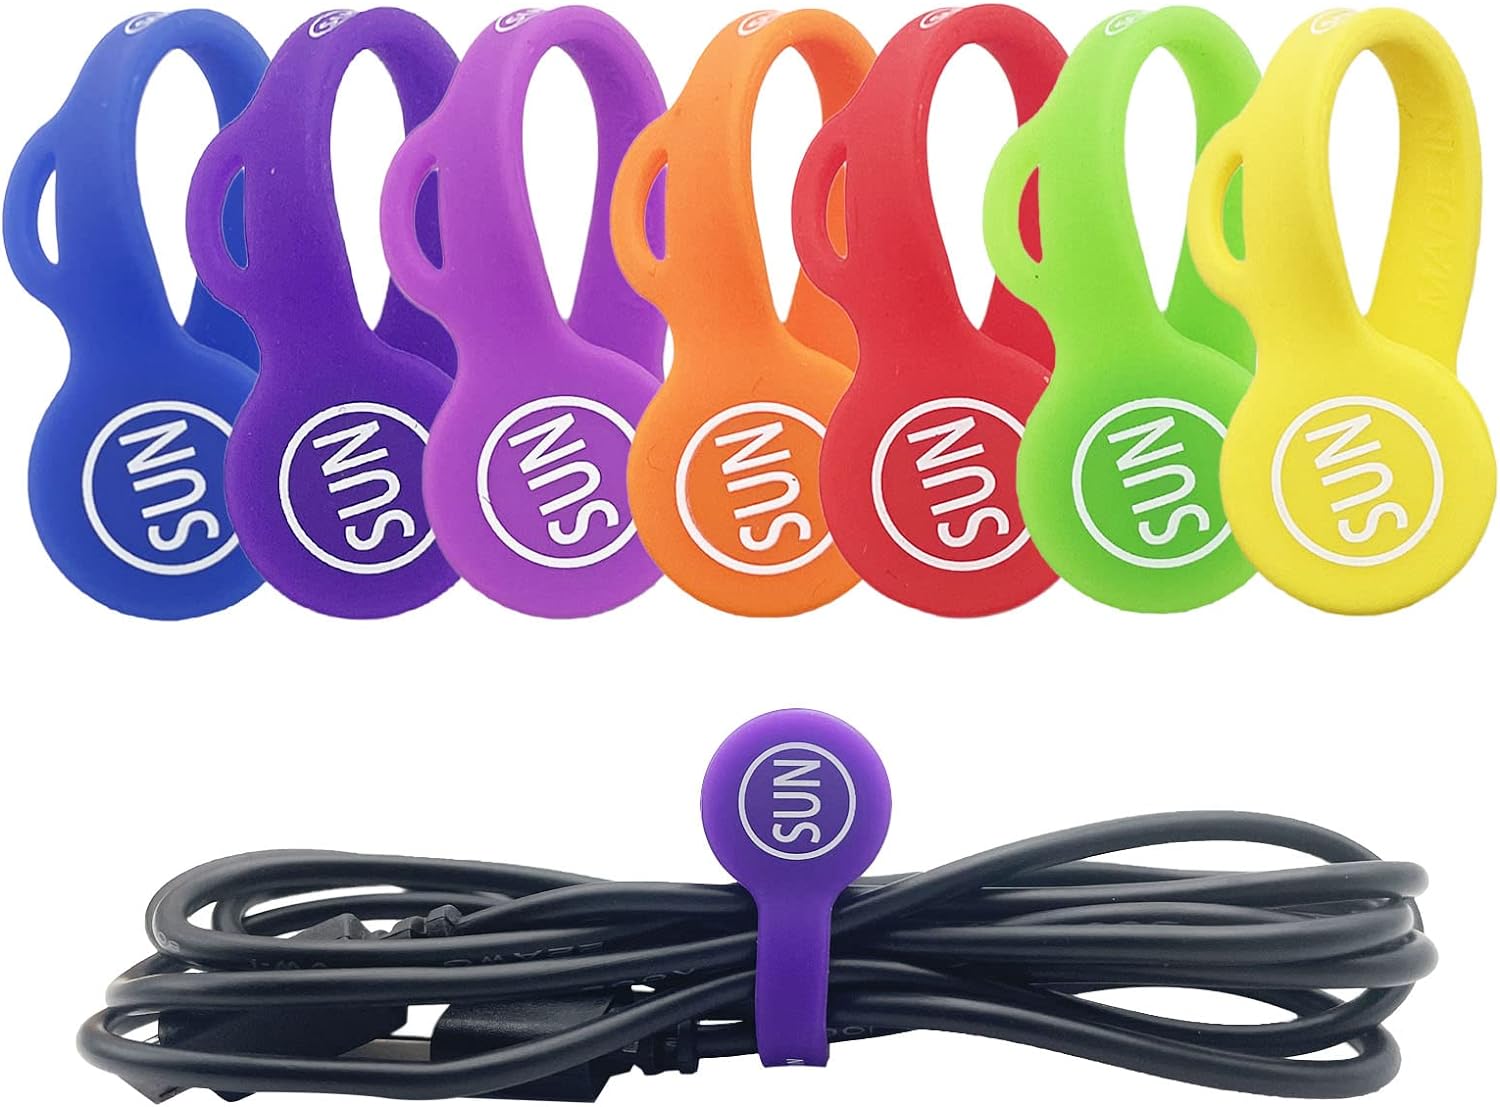 SUNFICON Magnetic Cable Clips Cable Organizers 7 Pack Rainbow Earbuds Cords Winder Bookmark Whiteboard Noticeboard Fridge Magnets USB Cable Manager Keeper Wrap Ties Straps Home Kitchen Office School